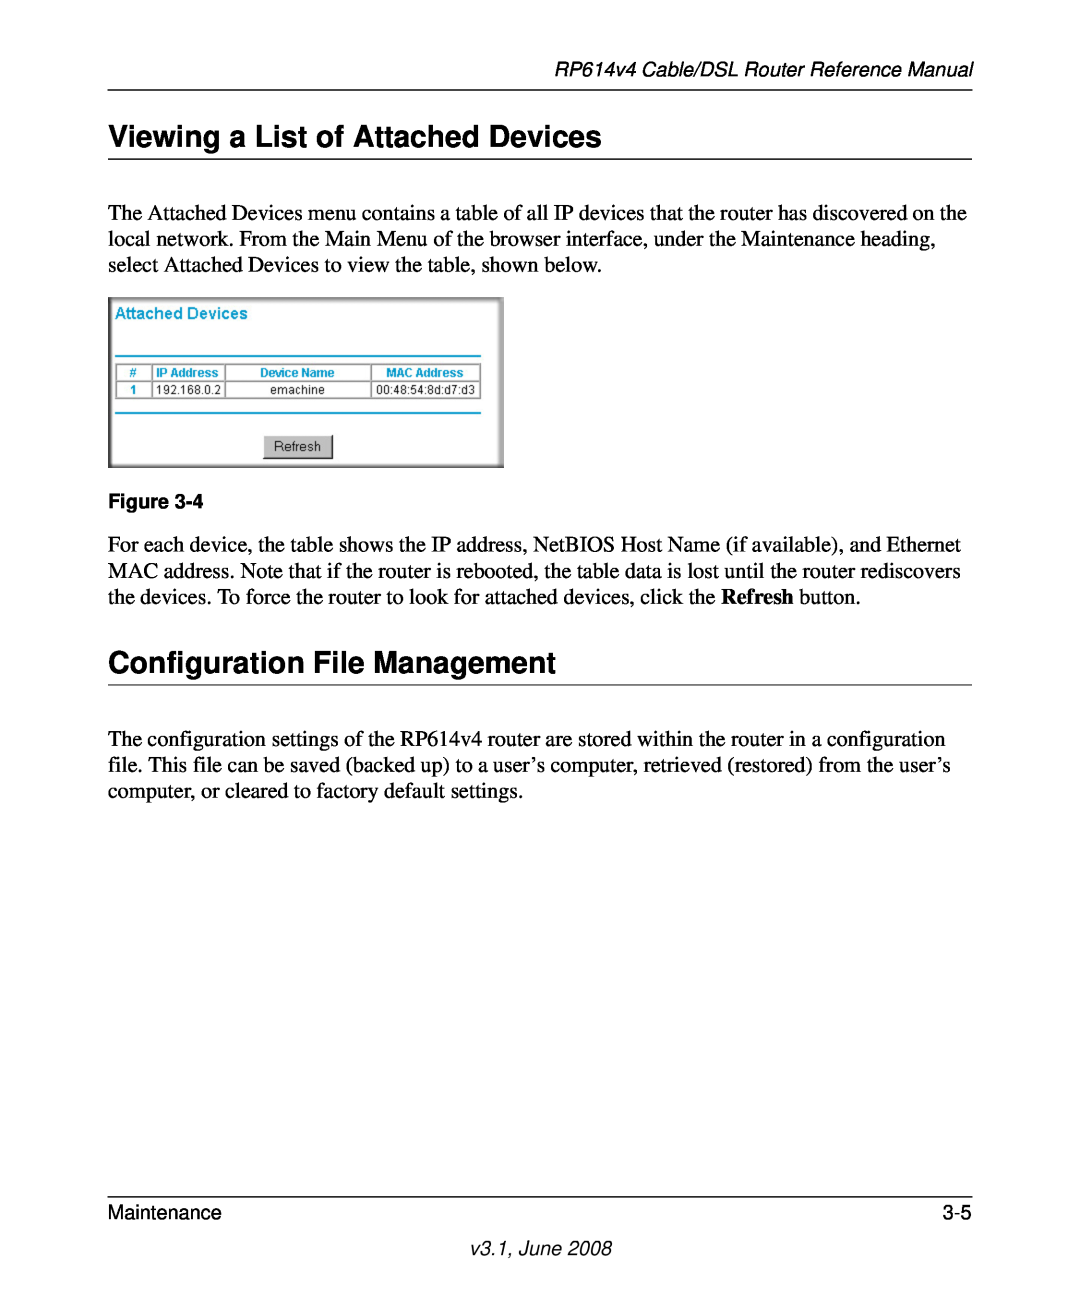 NETGEAR RP614 v4 manual Viewing a List of Attached Devices, Configuration File Management 